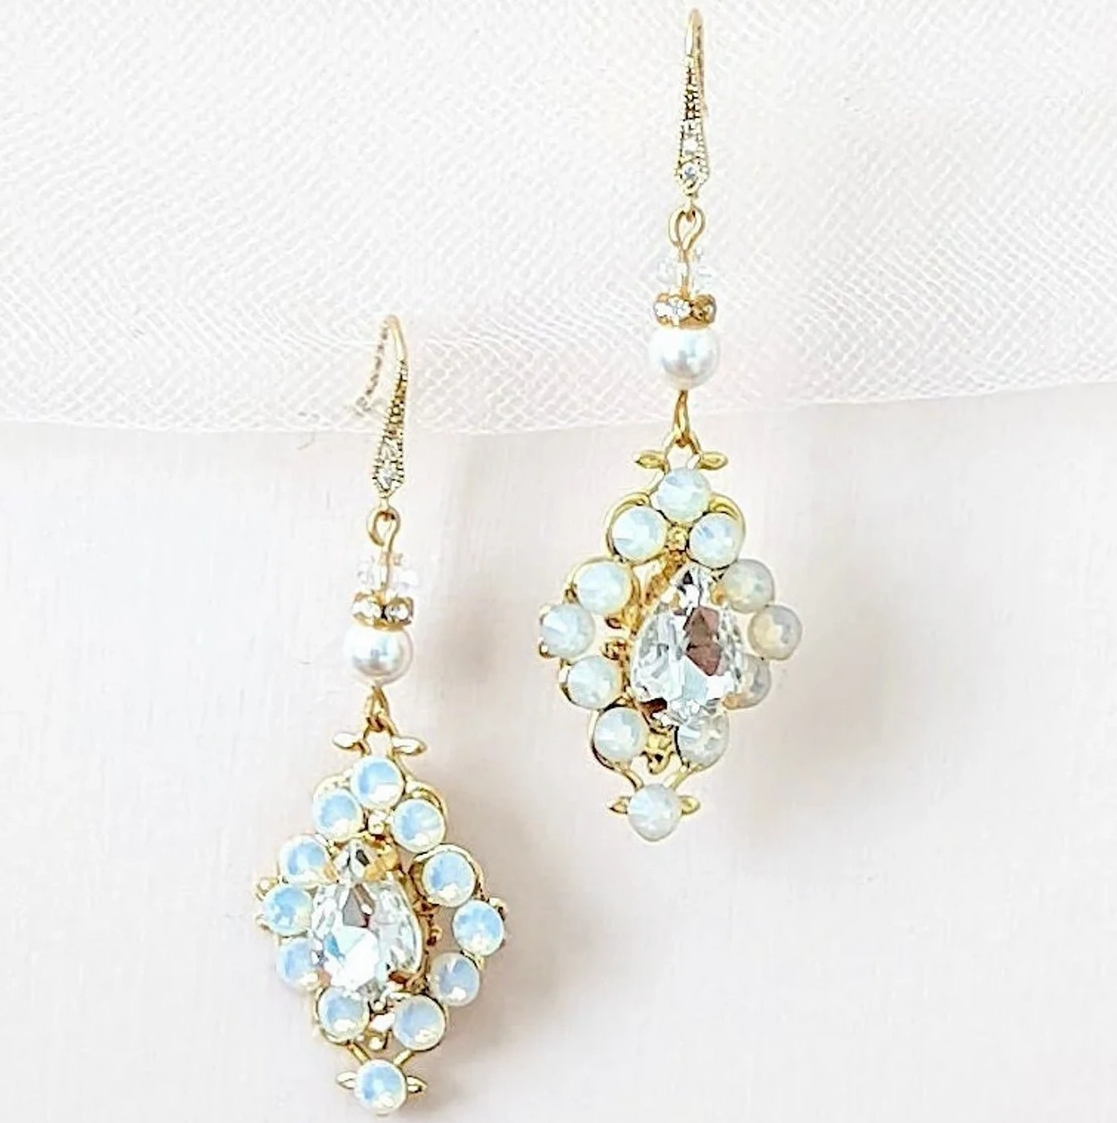 Crystal Wedding Earrings with Gold Sterling and White Opal - JazzyAndGlitzy